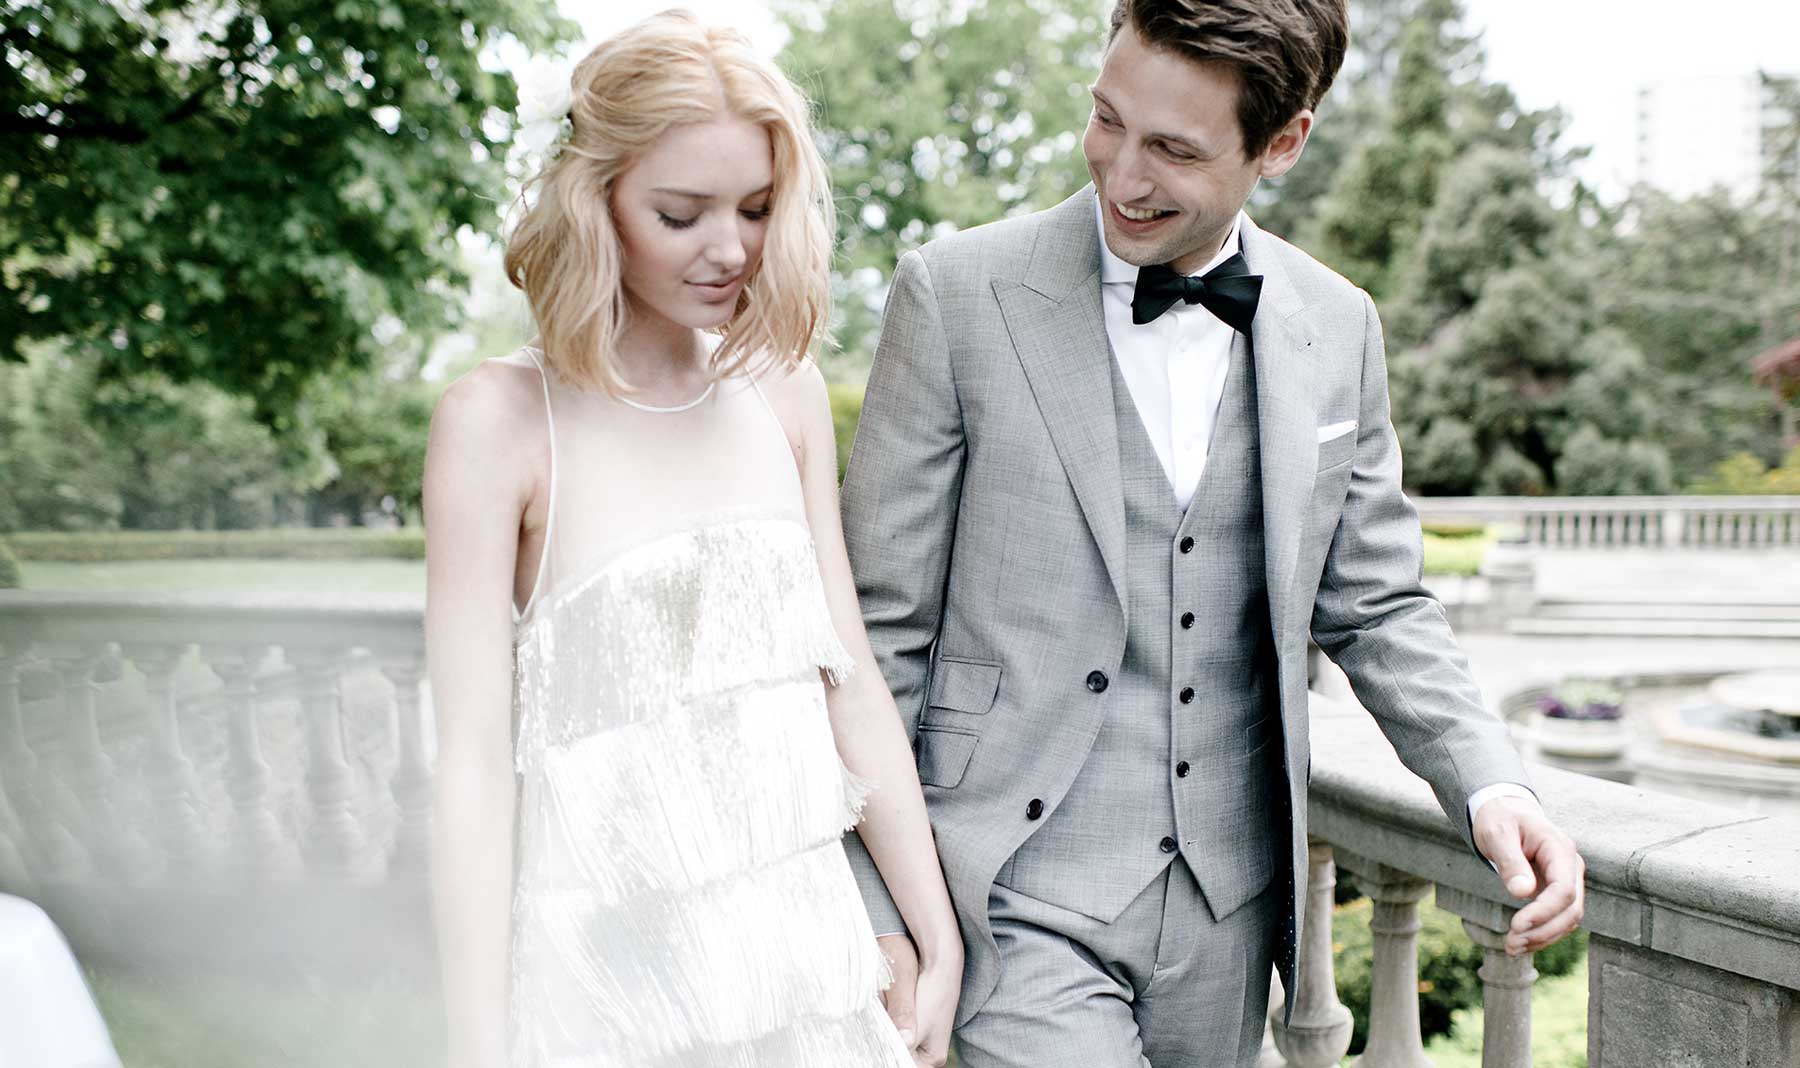 The wedding suit—not just for weddings!